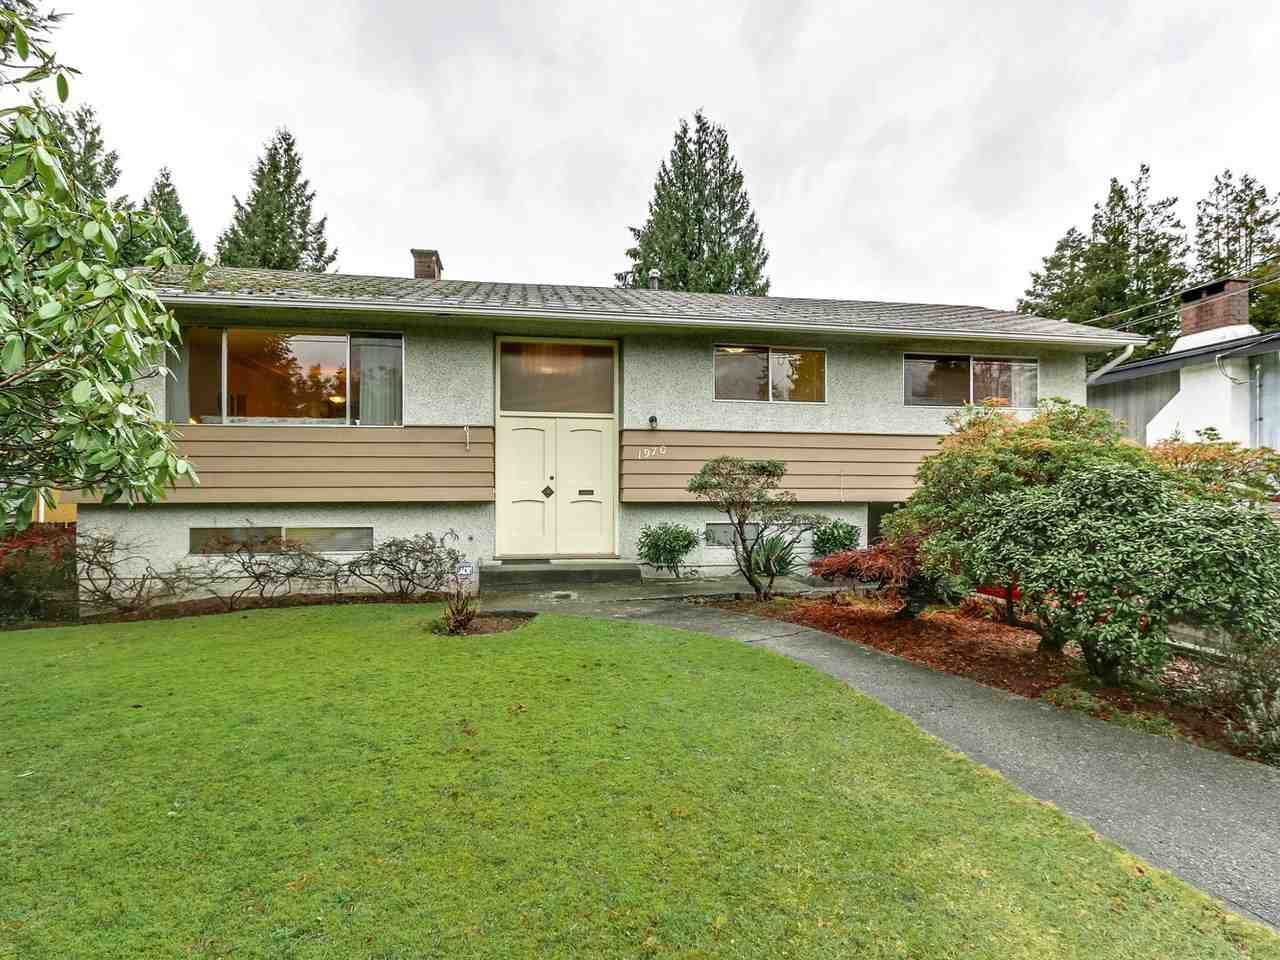 Main Photo: 1970 ORLAND Drive in Coquitlam: Central Coquitlam House for sale : MLS®# R2330558